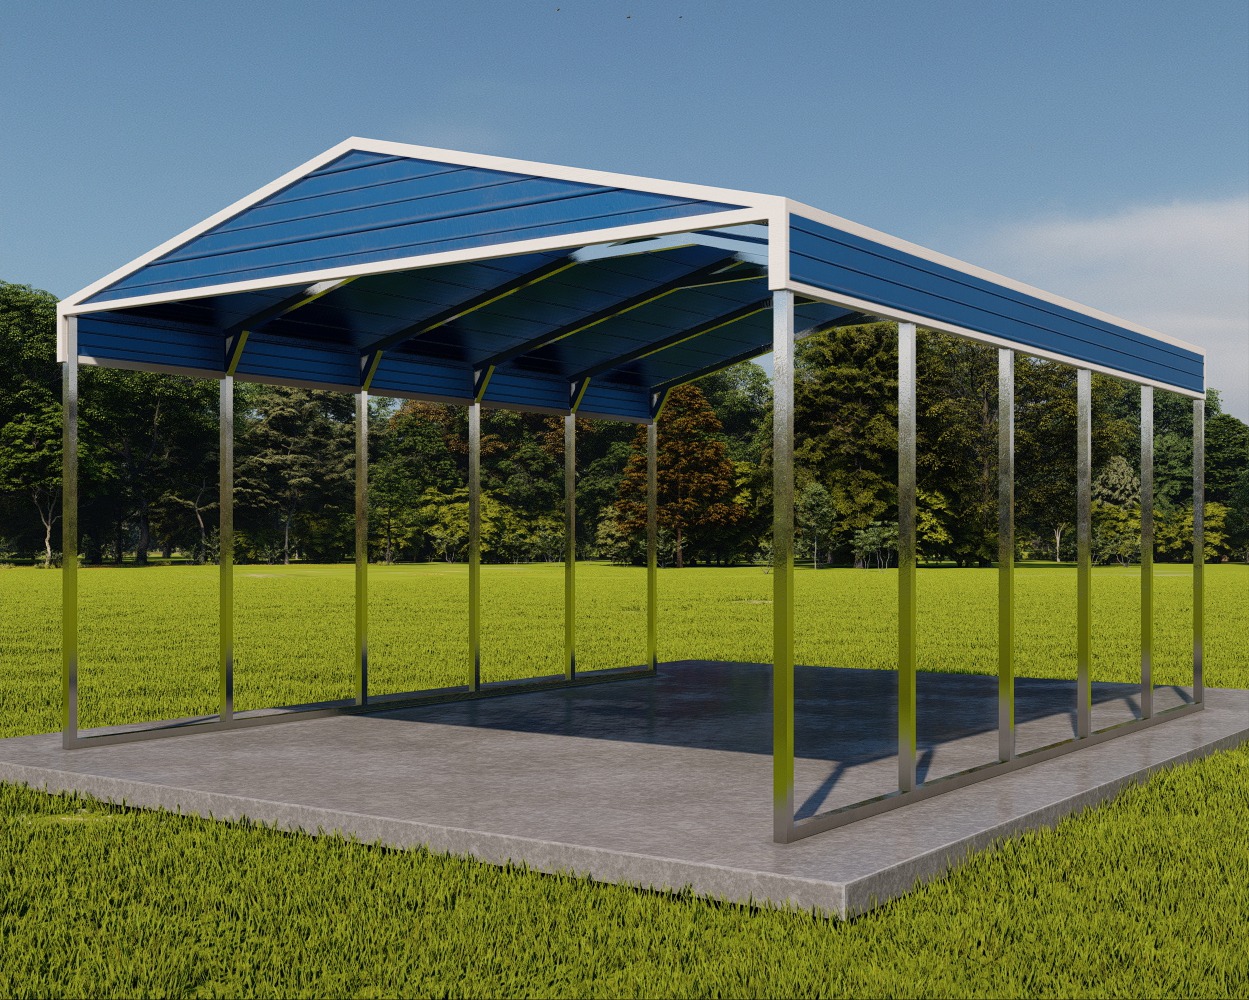 Image of metal carport with blue roof and white trim